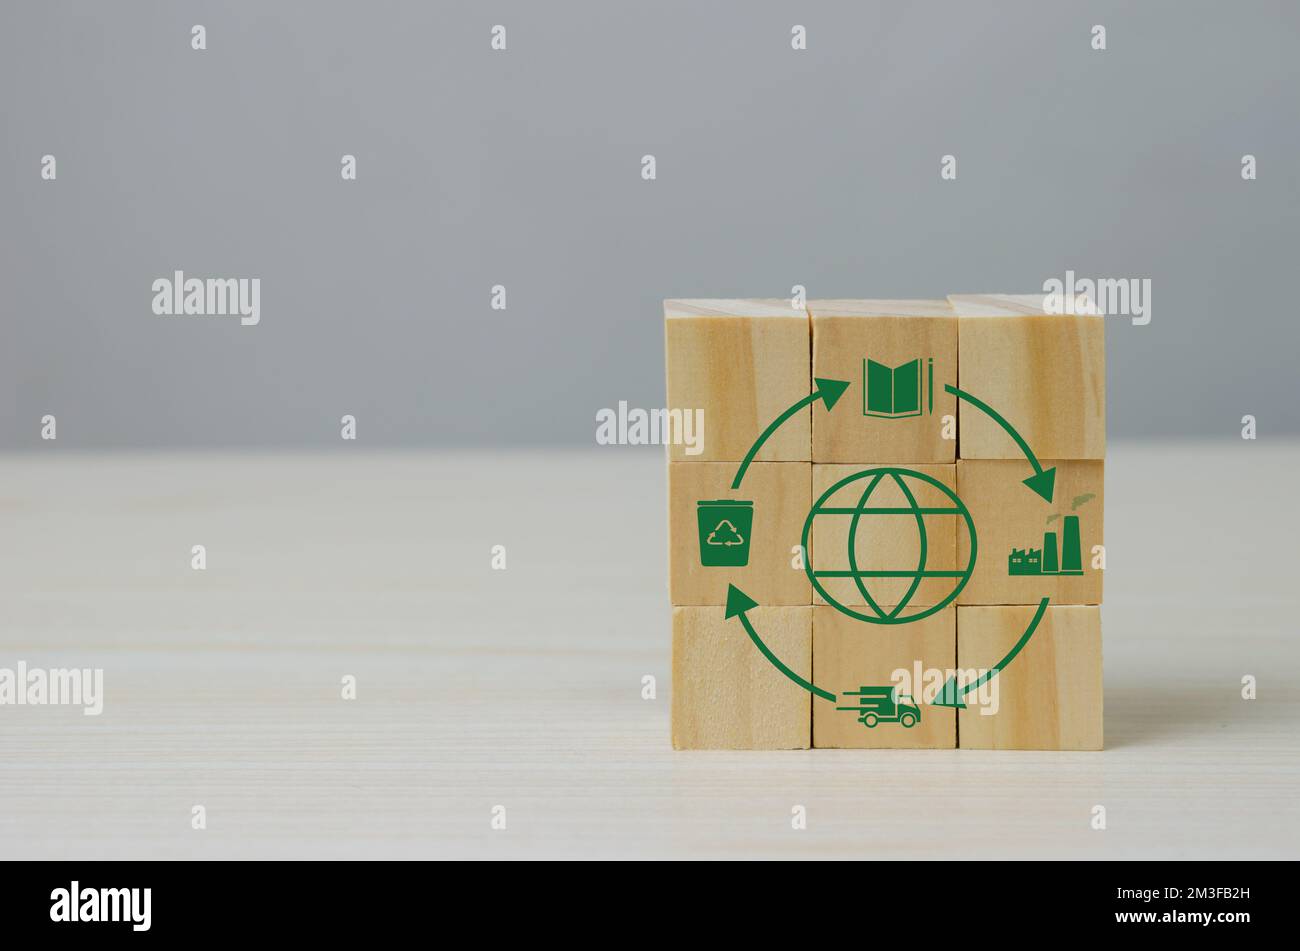 Net zero green technology innovation eco carbon renewable energy business Circular Economy concept with wood cube blocks. Stock Photo